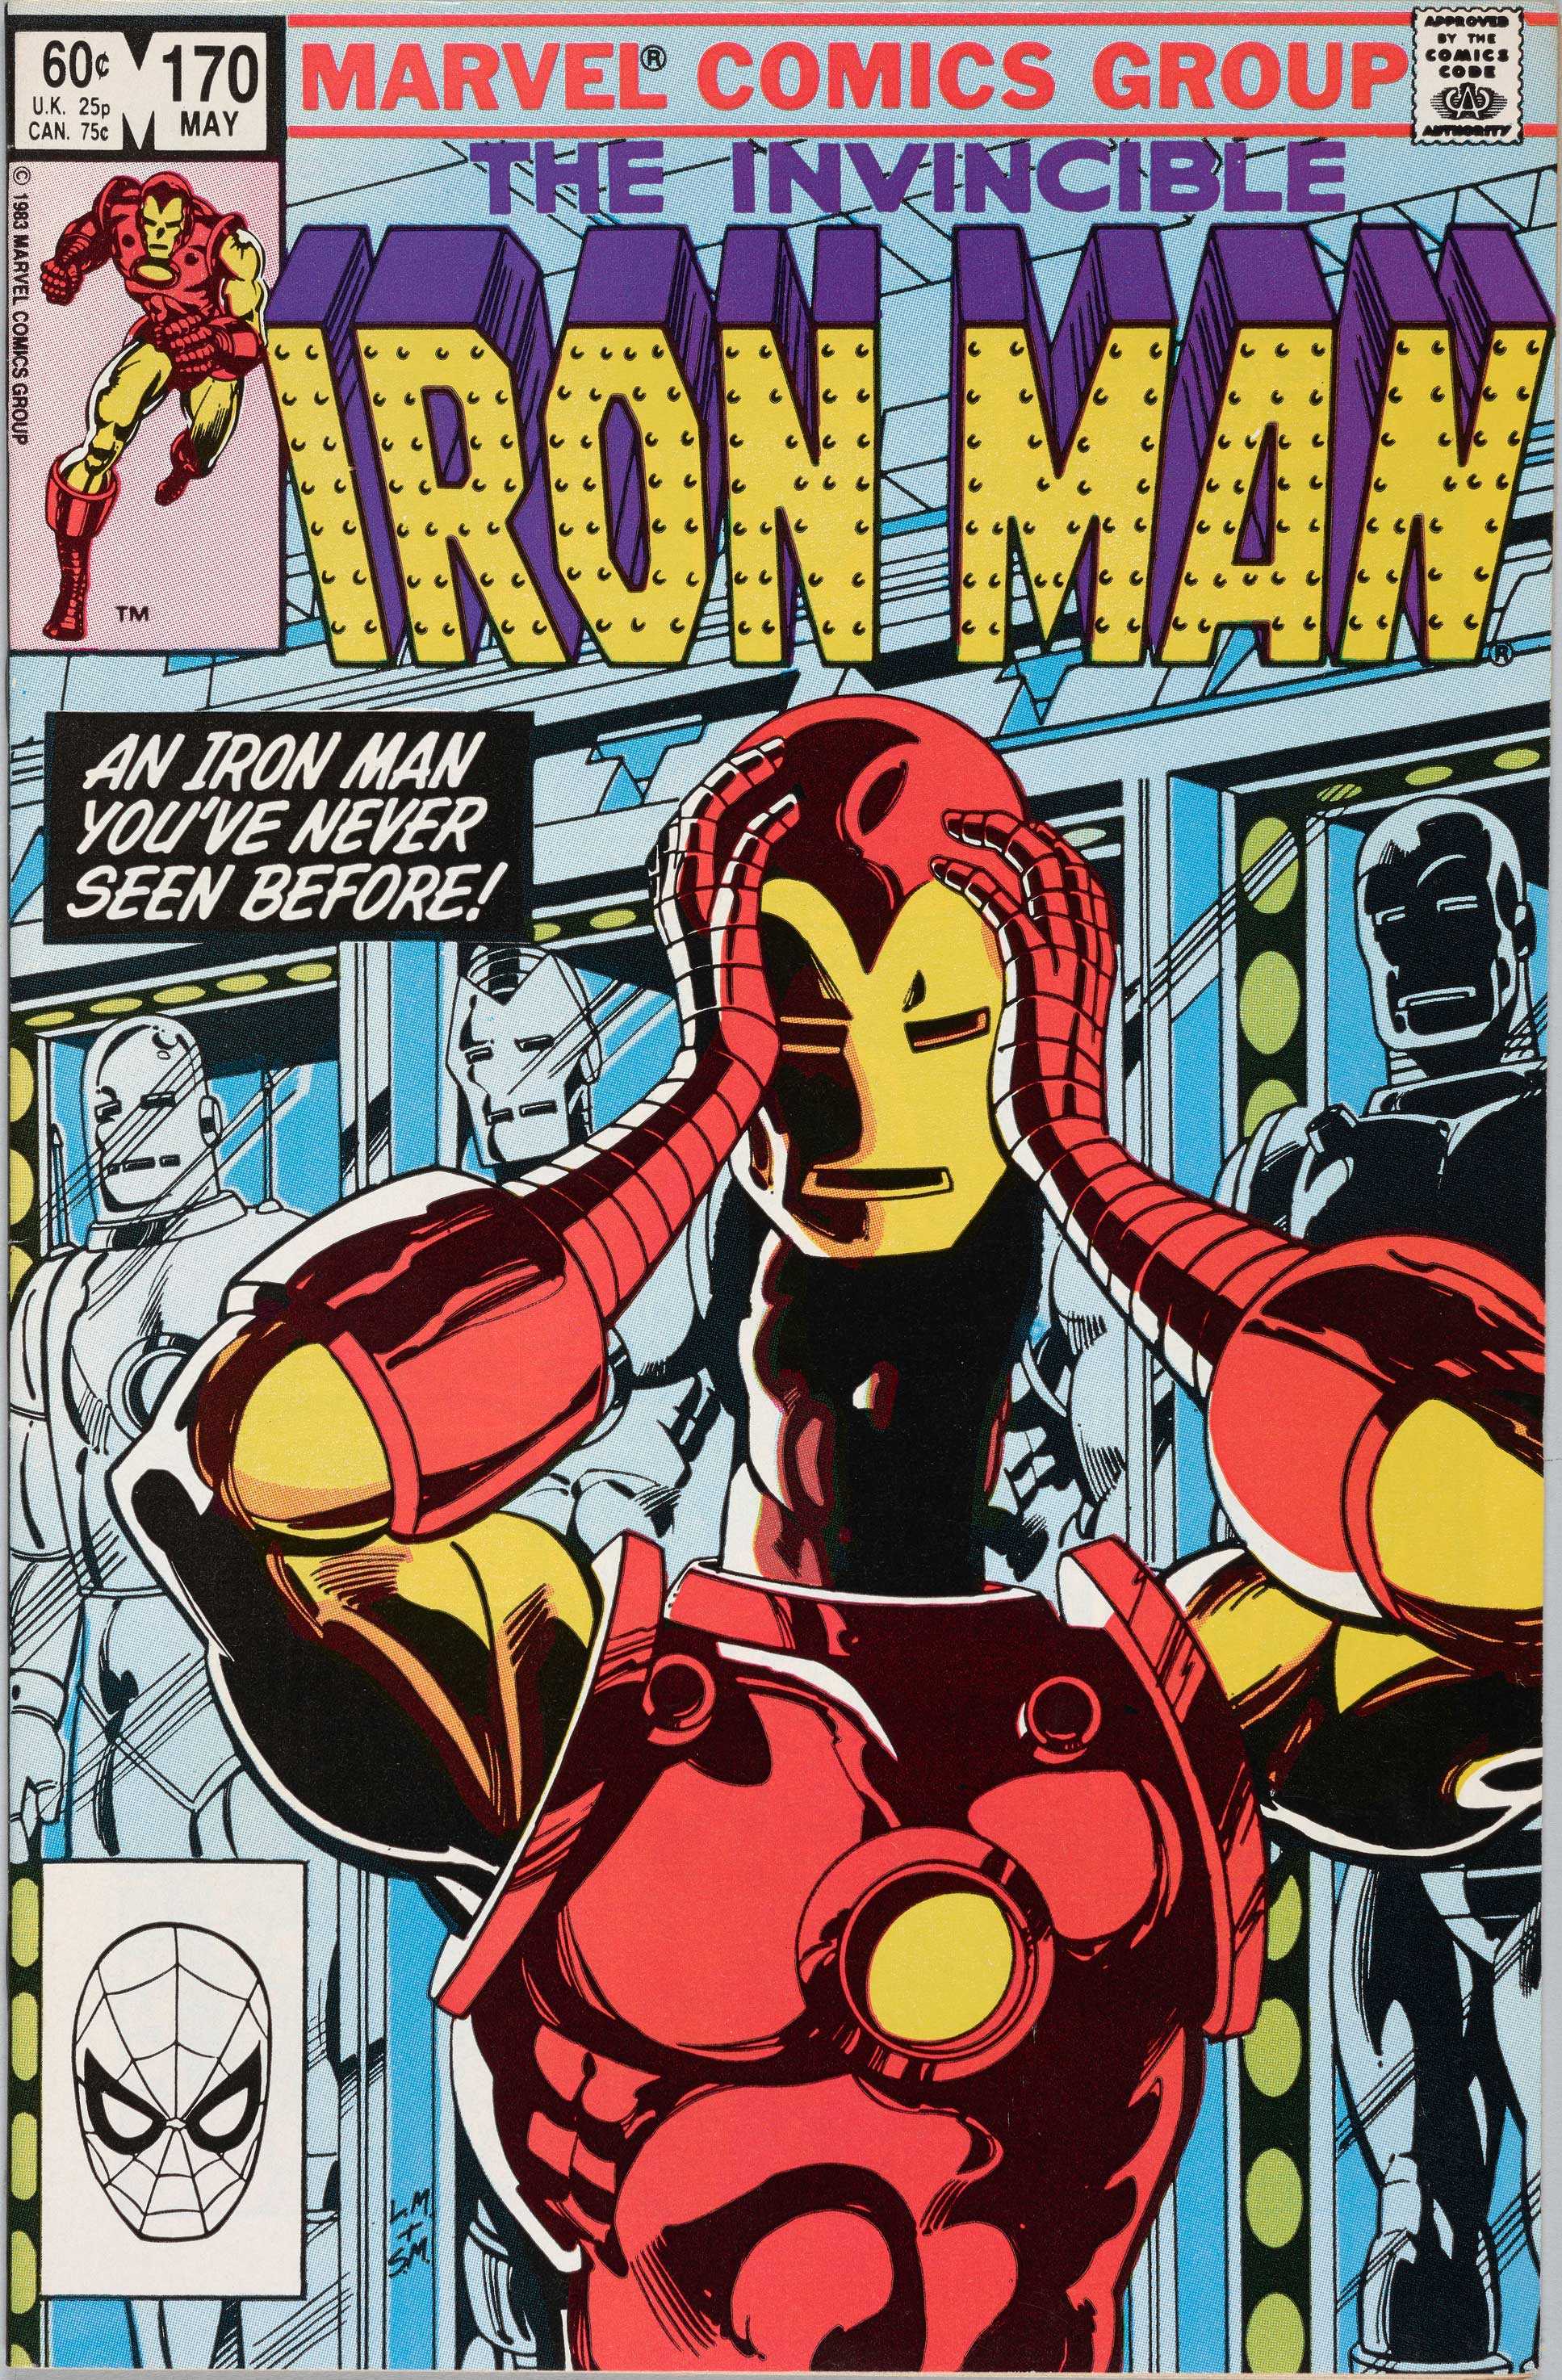 Ironic Man comic book cover with him taking off his helment with his face in the shadow.